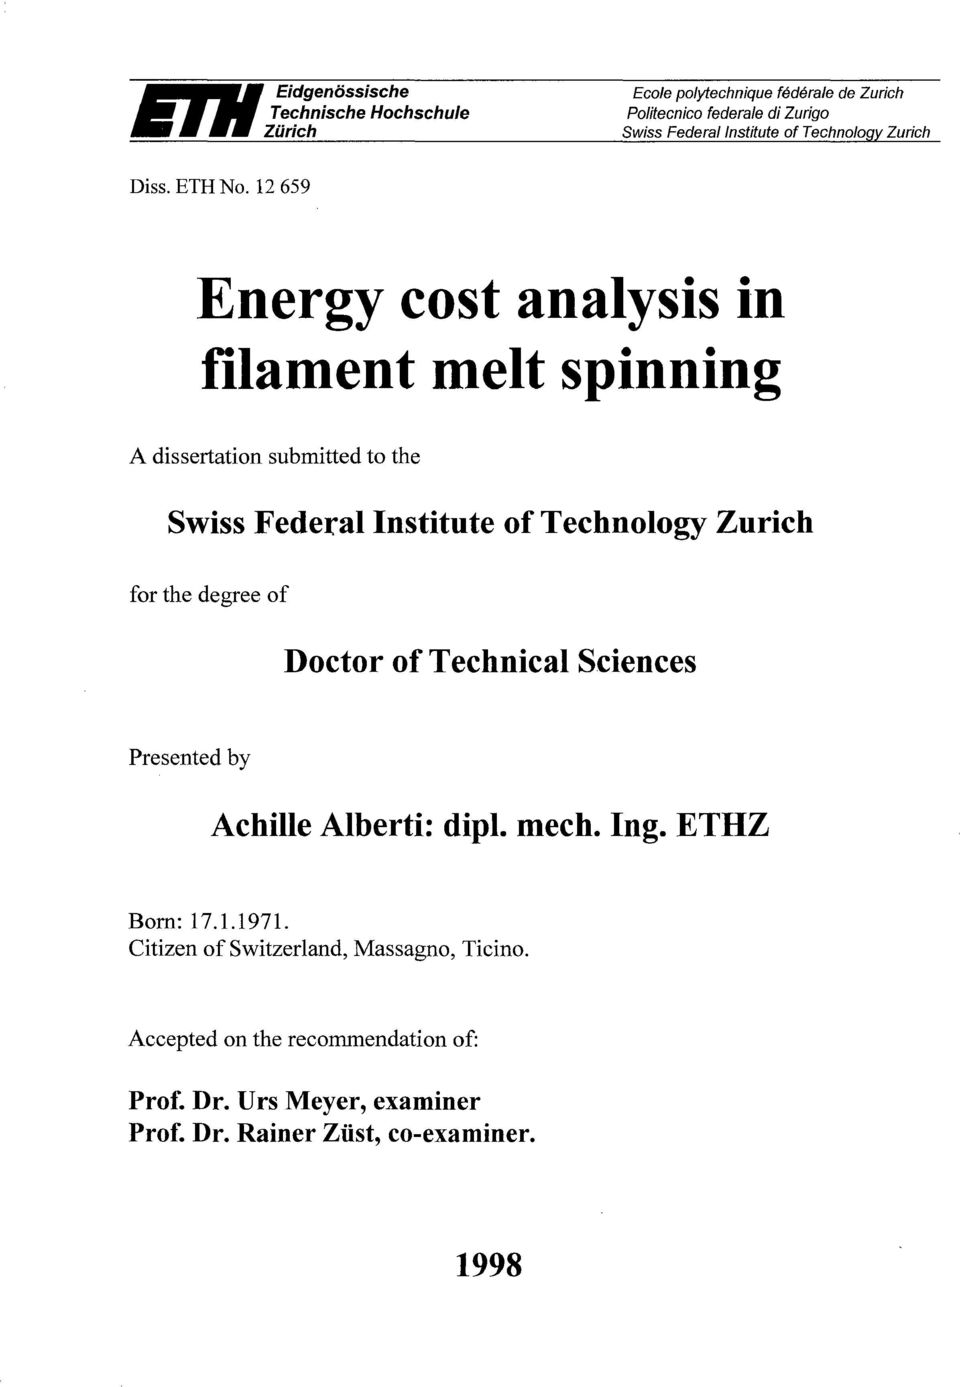 12 659 Energy cost analysis in filament melt spinning A dissertation submitted to the Swiss Federal Institute of Technology Zurich for the